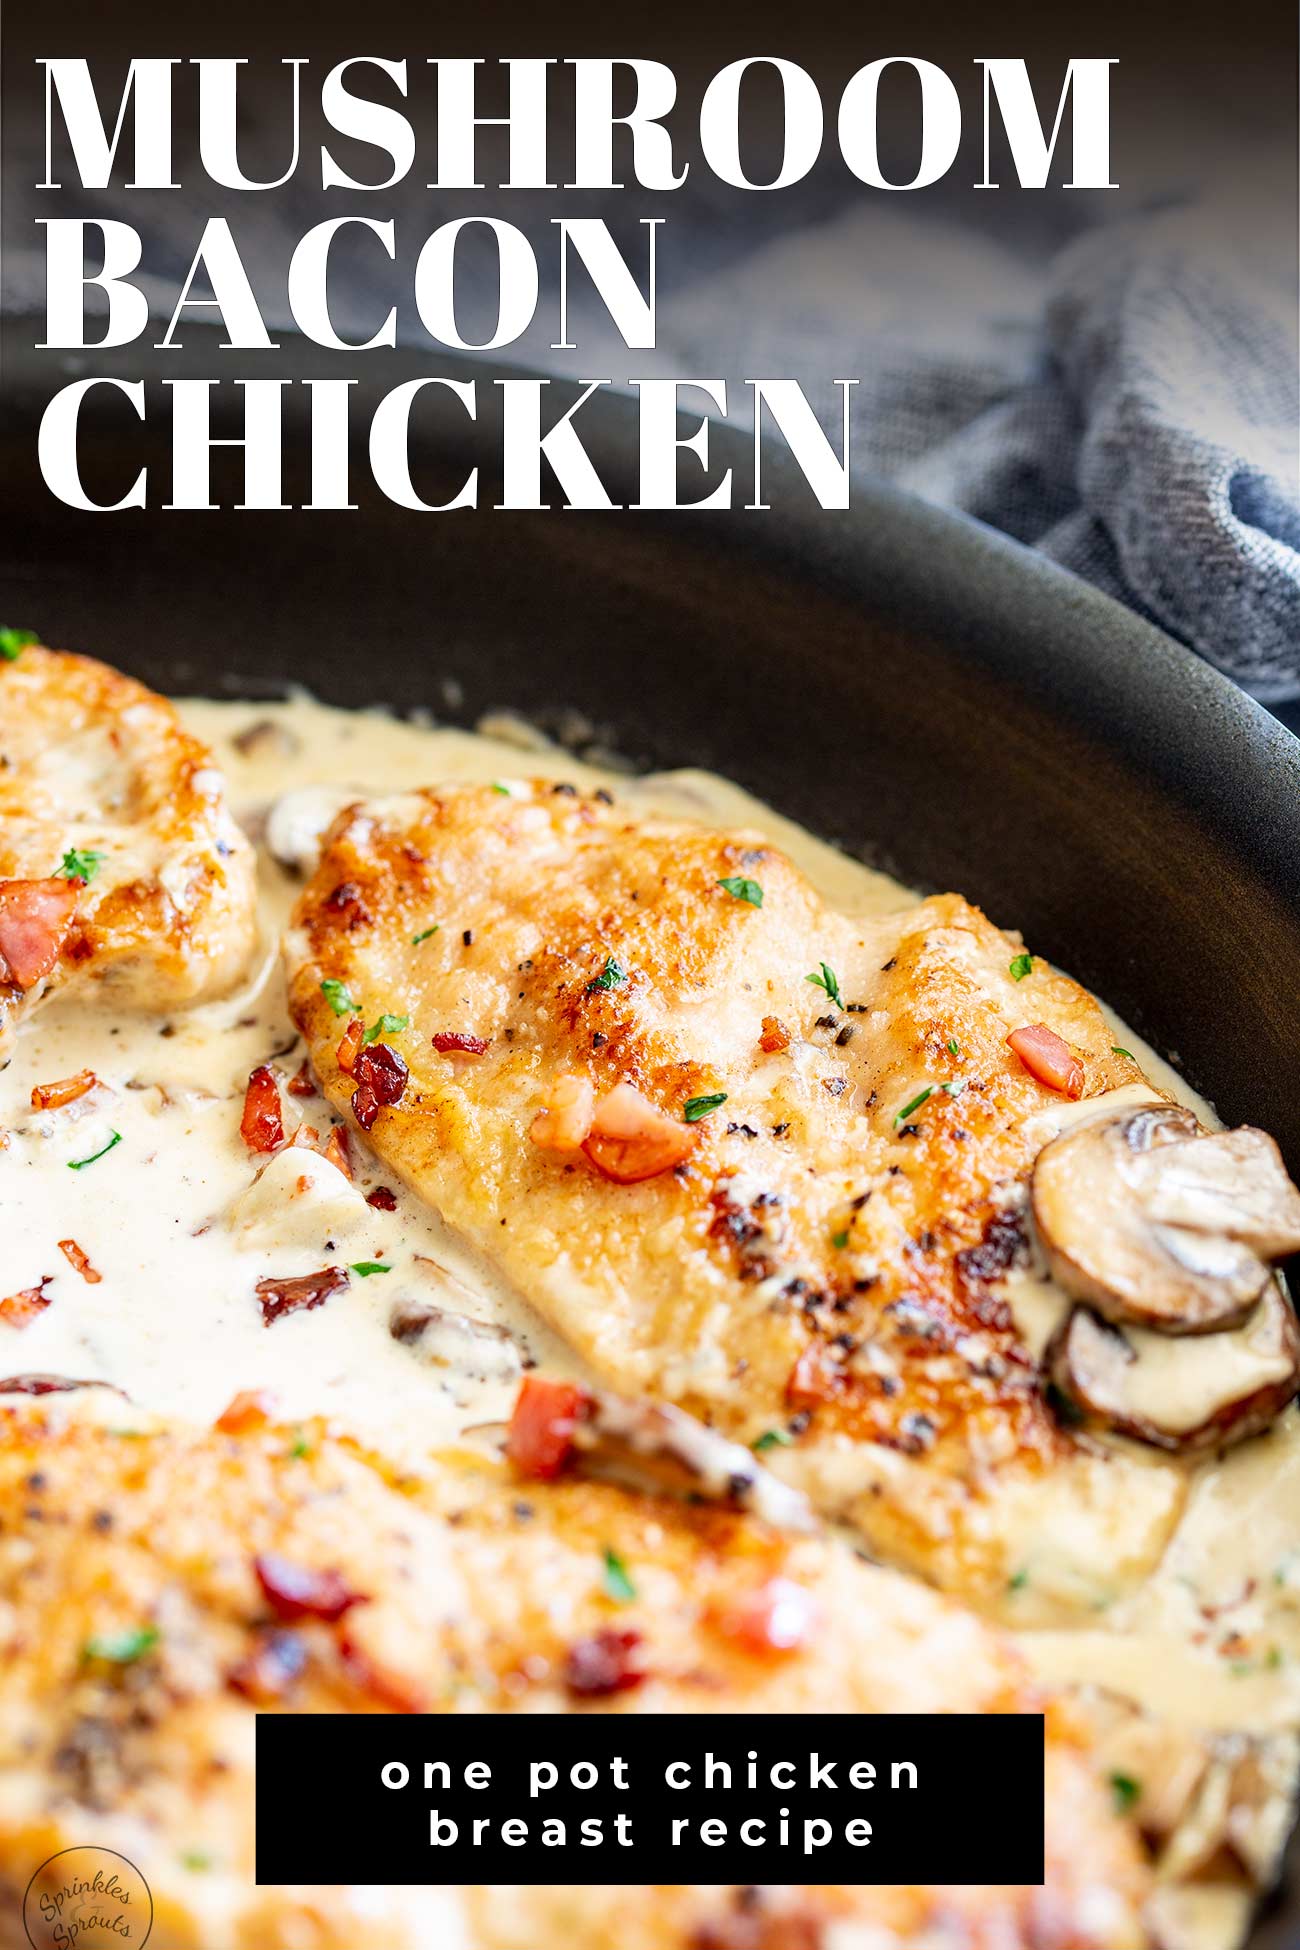 Pinterest image. Mushroom bacon chicken picture with text overlay